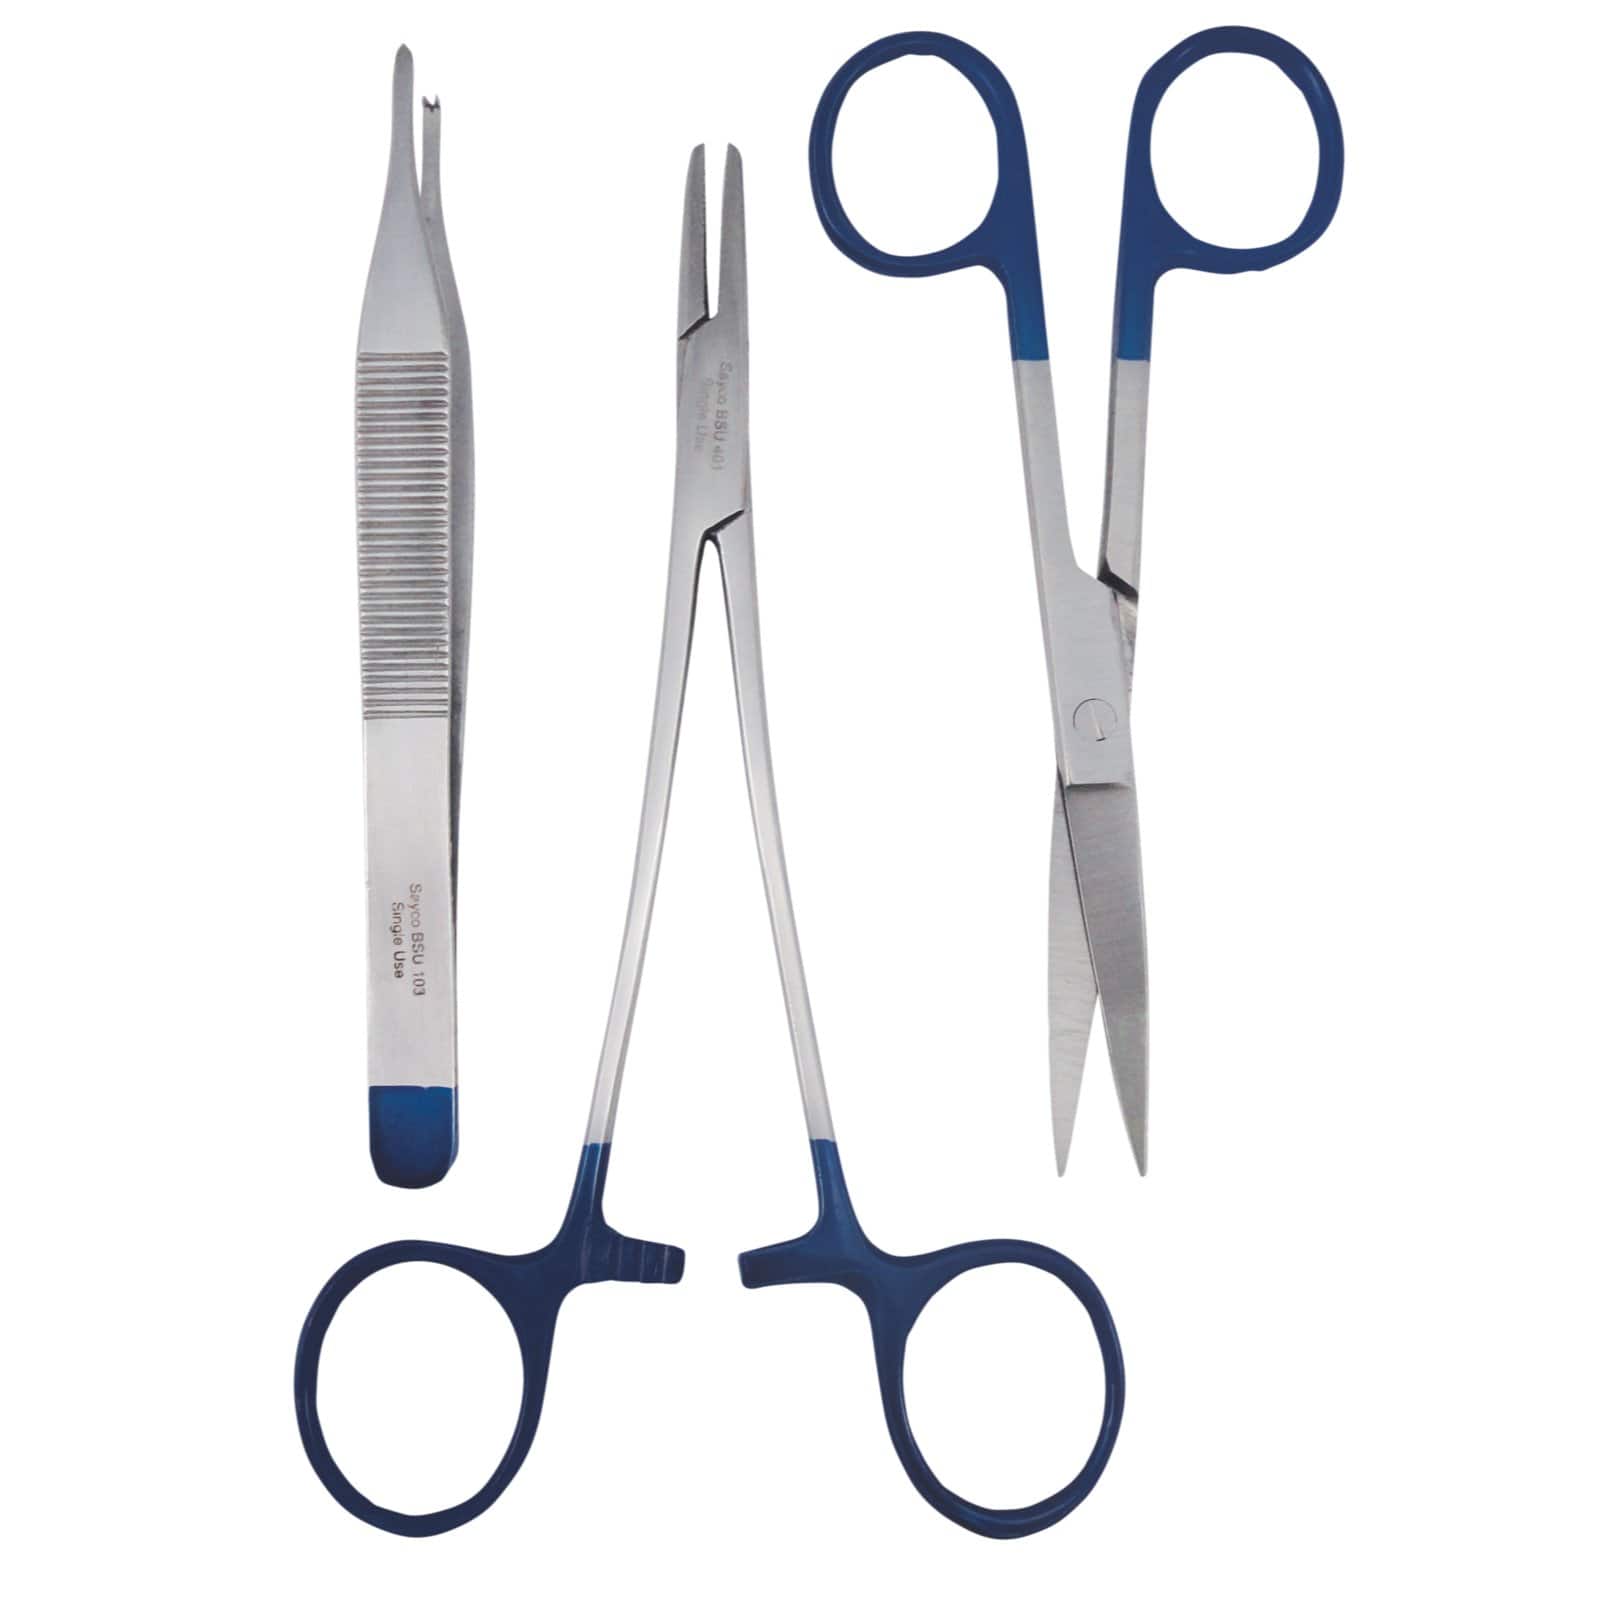 SAYCO Sterile Surgical Instruments Sharp/Sharp SAYCO Sterile Suture Pack with Scissors